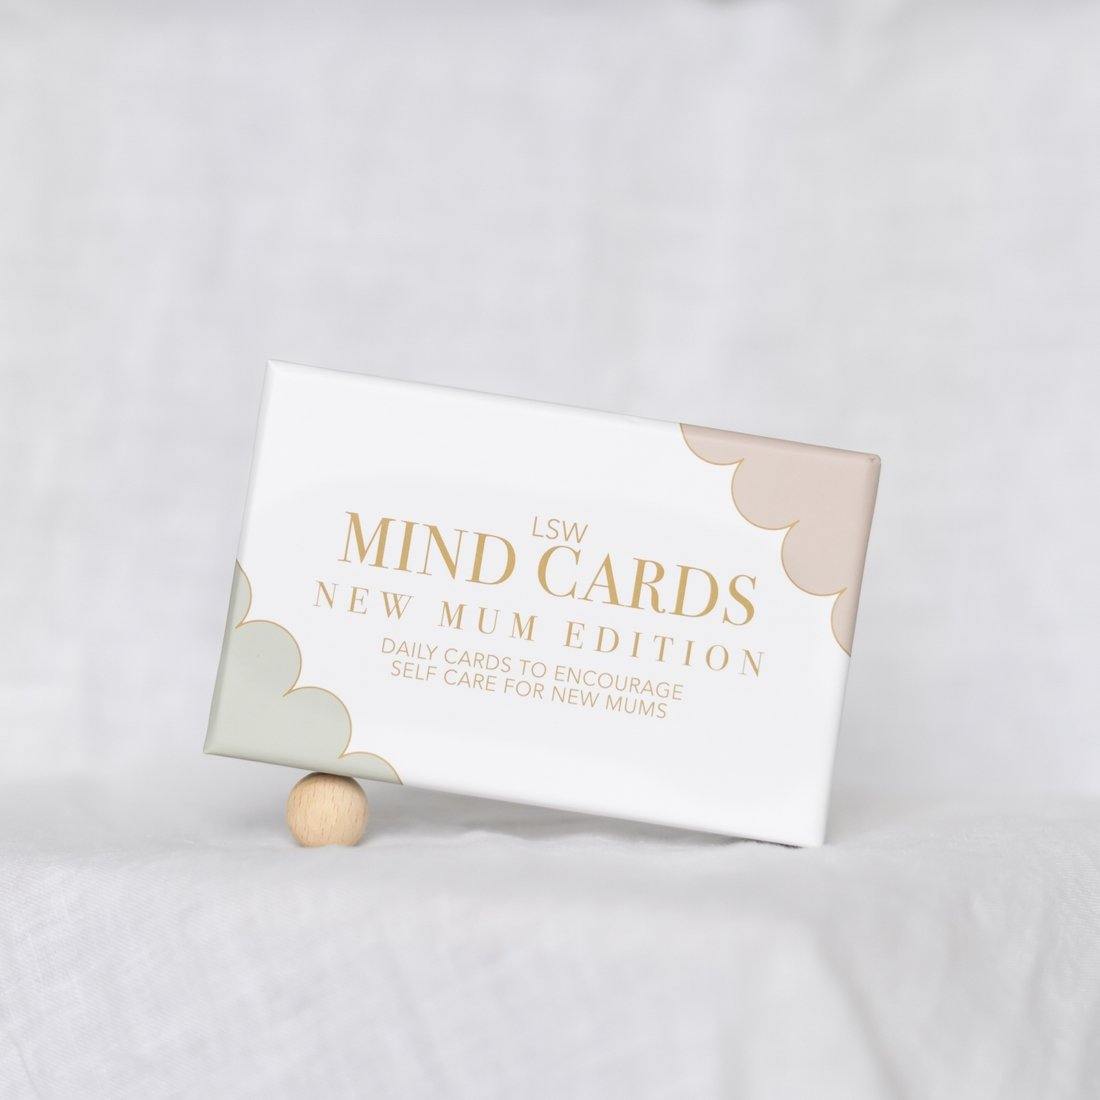 LSW Mind Cards - New Mom Edition - La Défense - Niche Beauty and Wellness